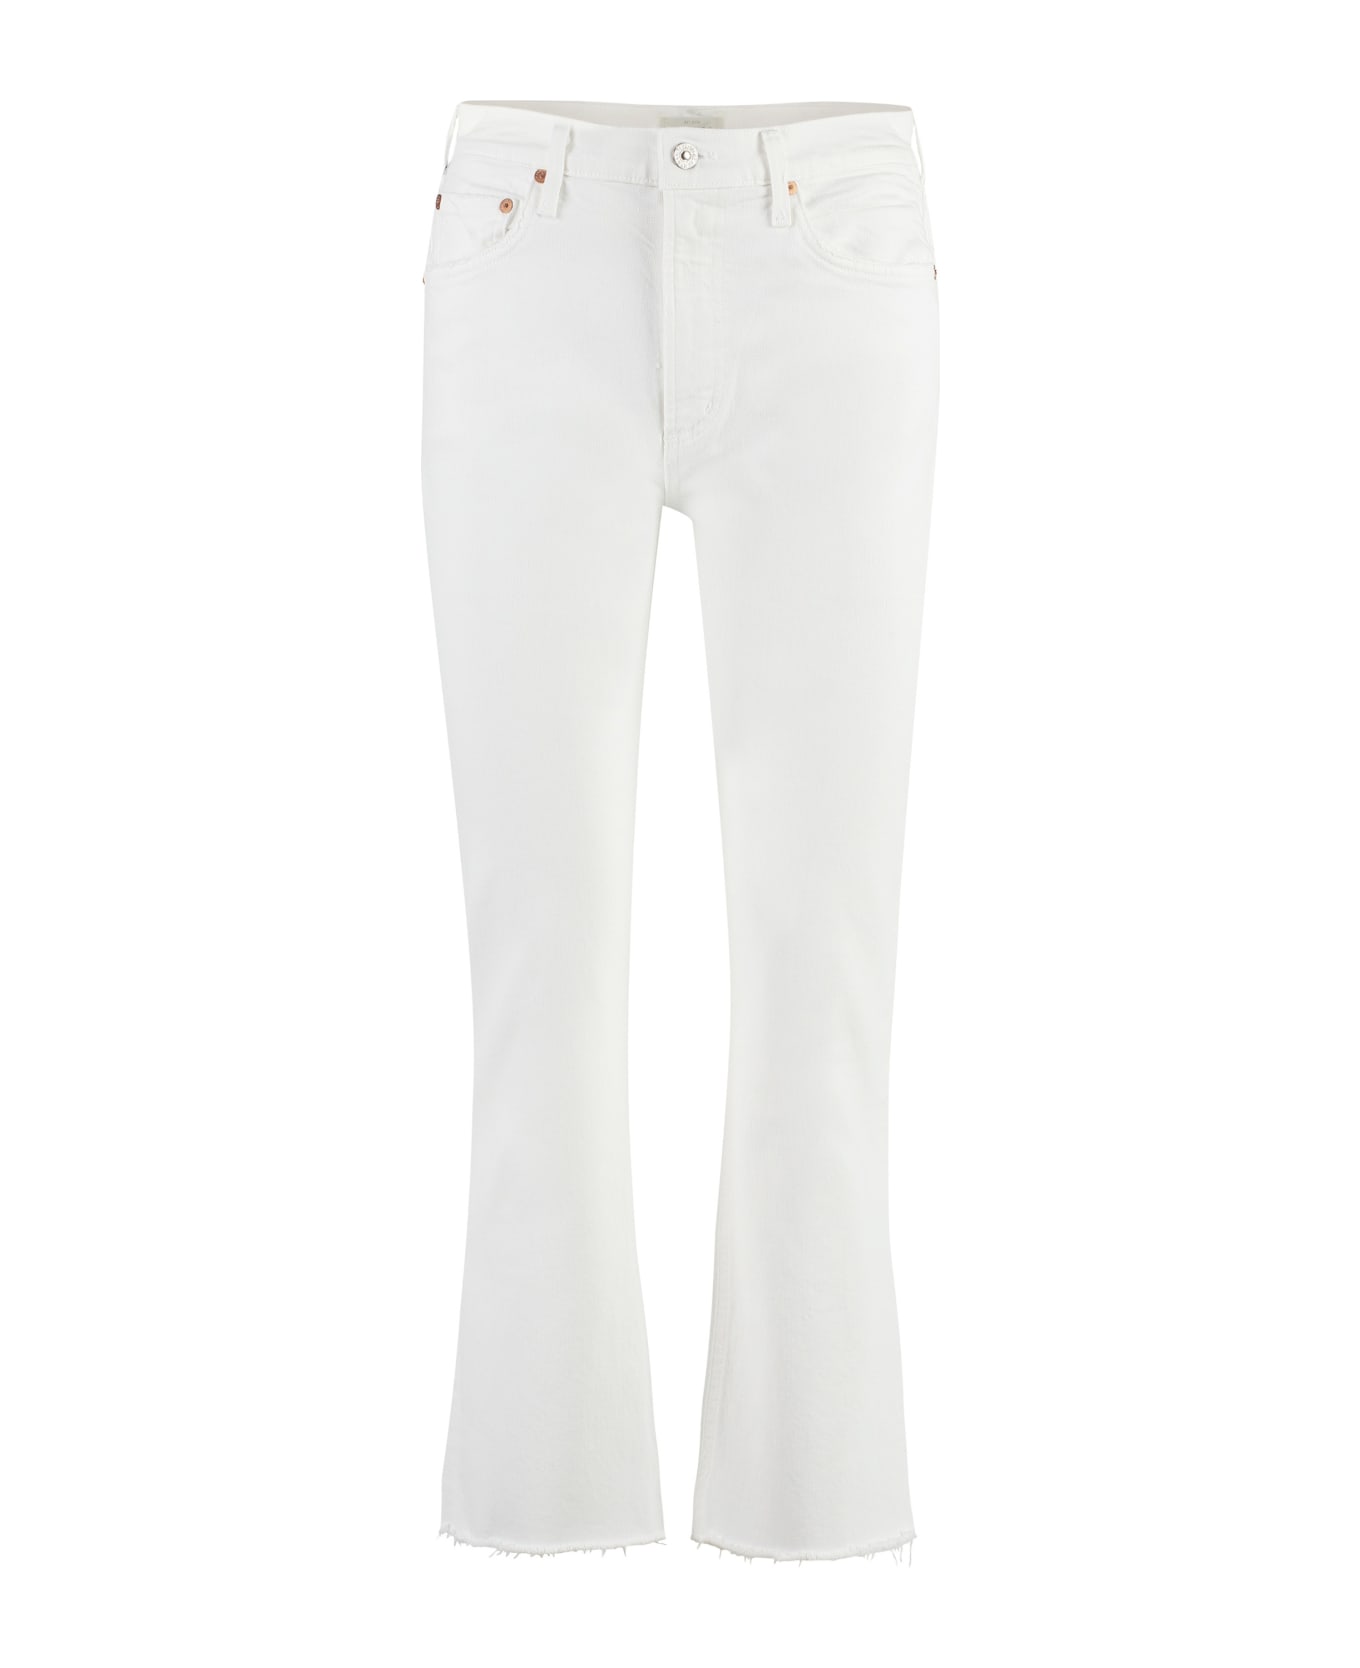 Citizens of Humanity Cropped Jeans - White デニム